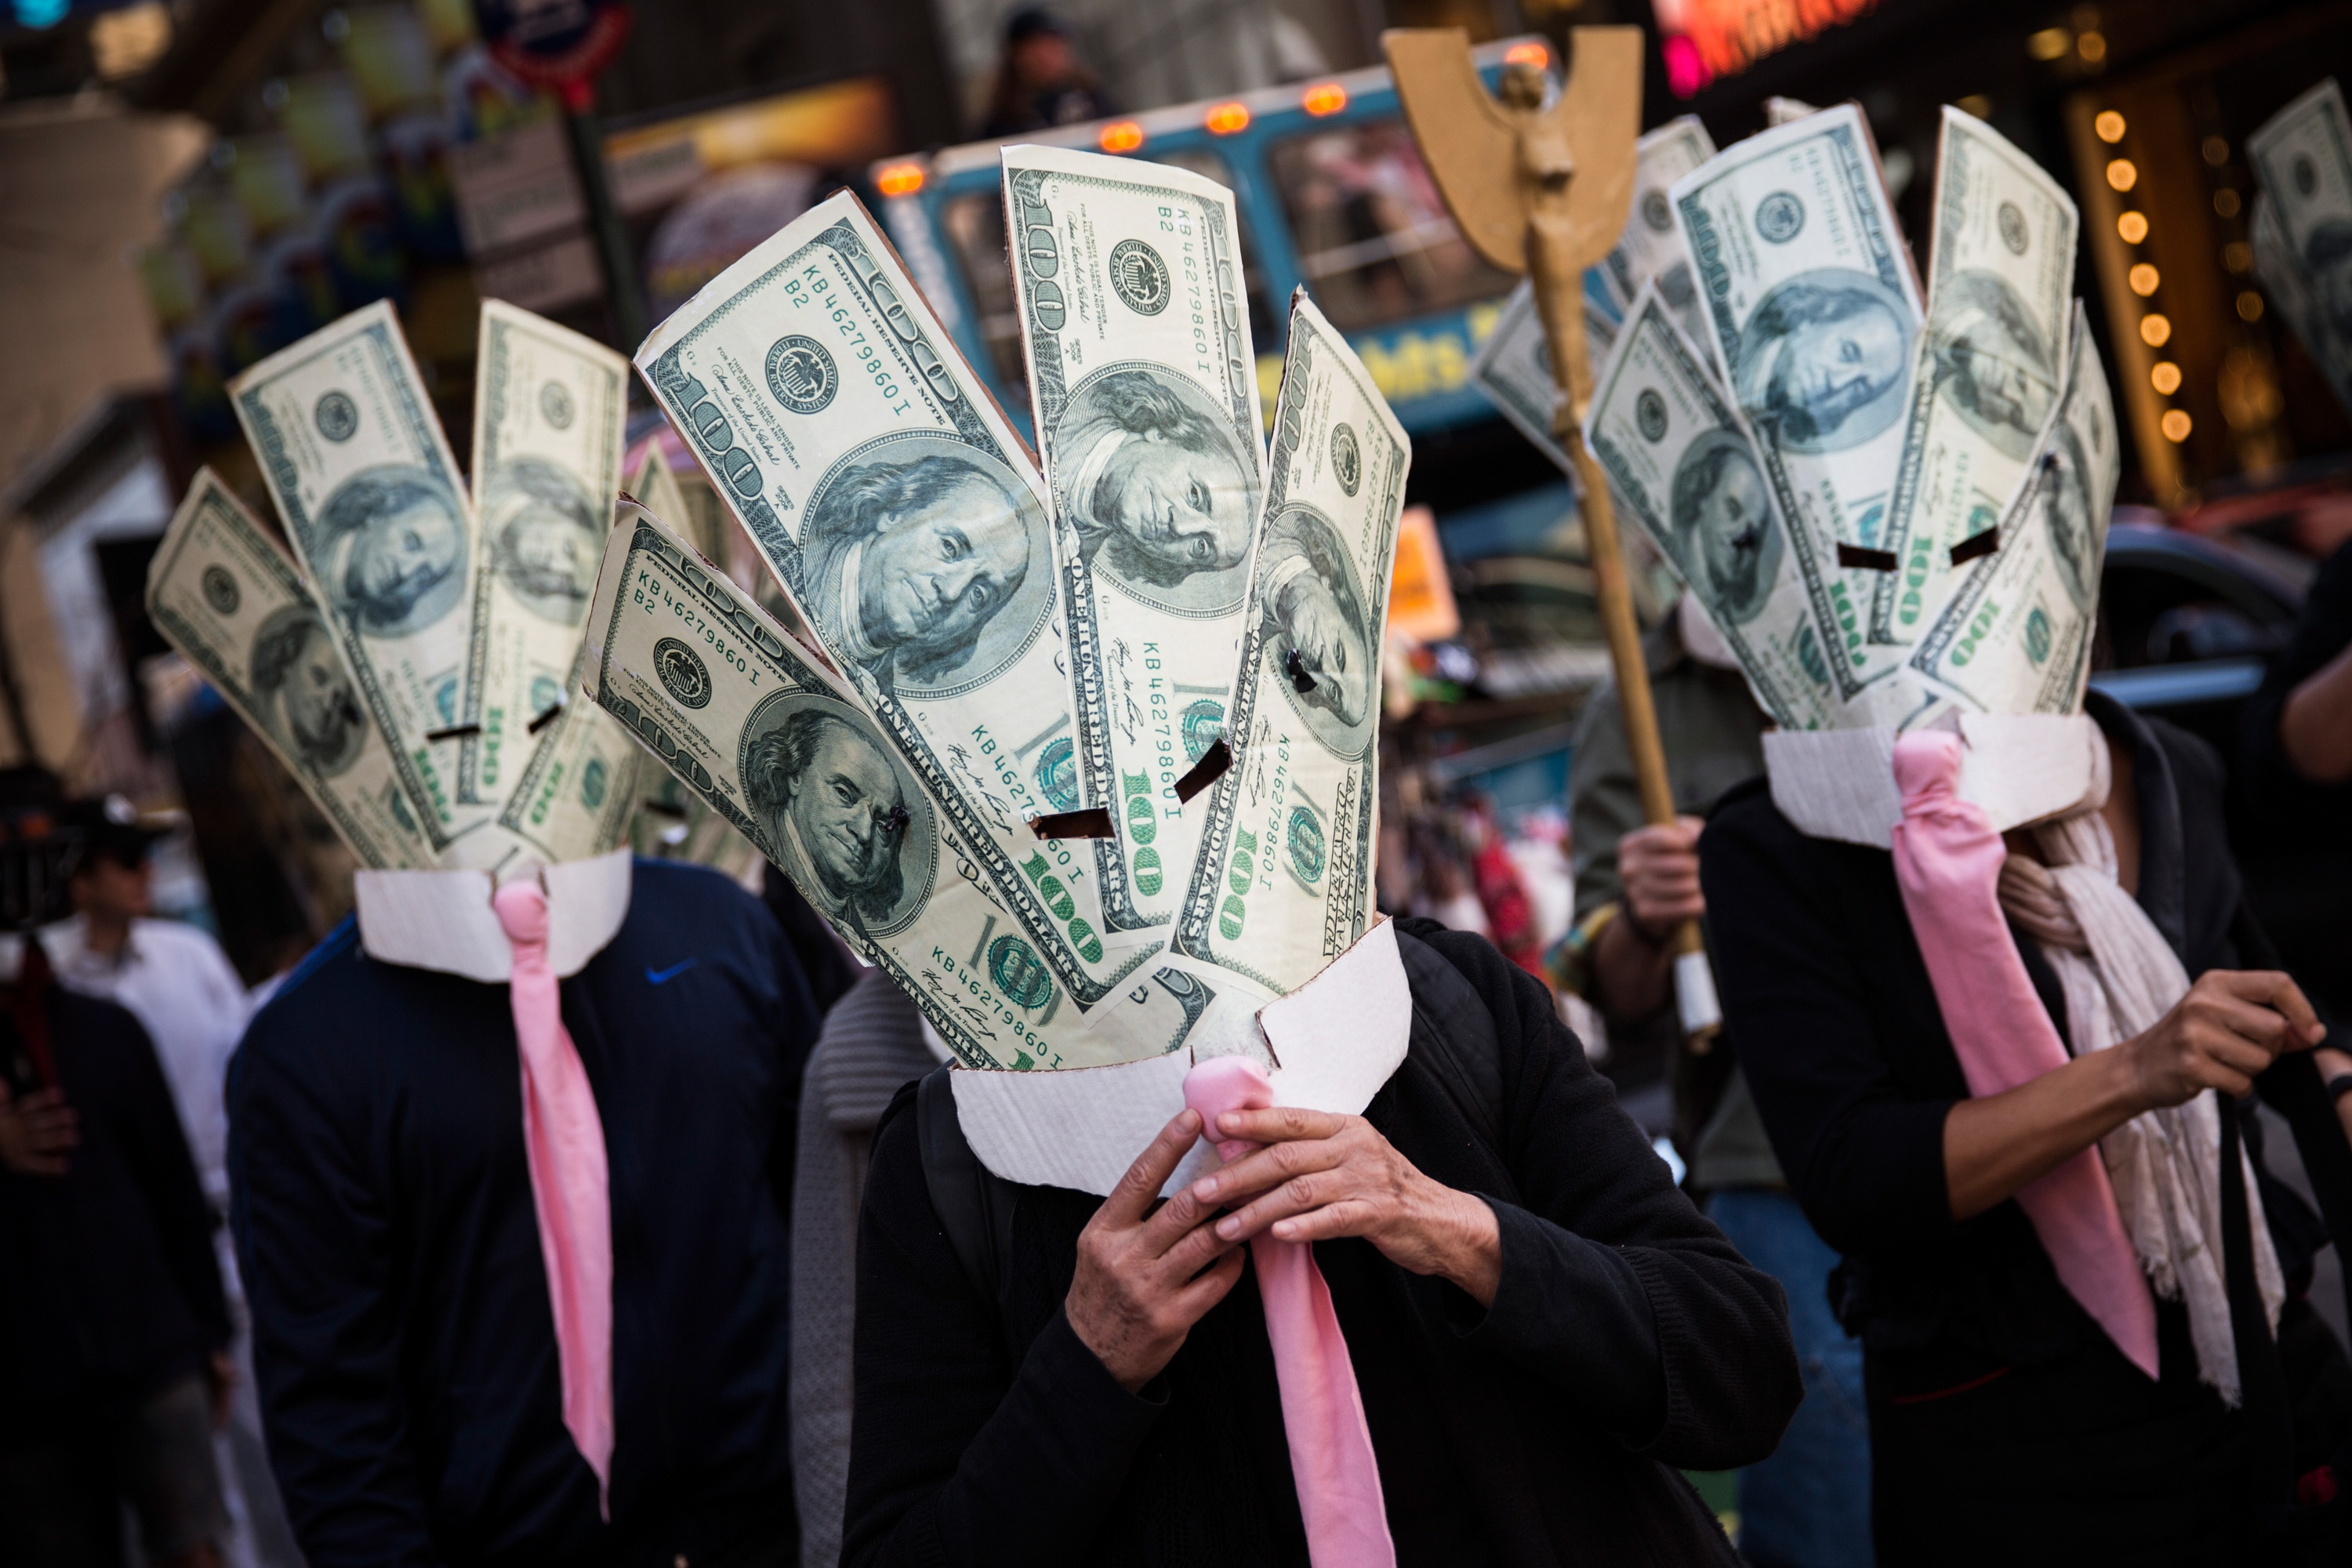 Occupy Wall Street protesters wearing masks made out of enlarged dollar bills act in a short skit in Times Square in New York City on Sept. 17, 2013 (Andrew Burton—Getty Images)